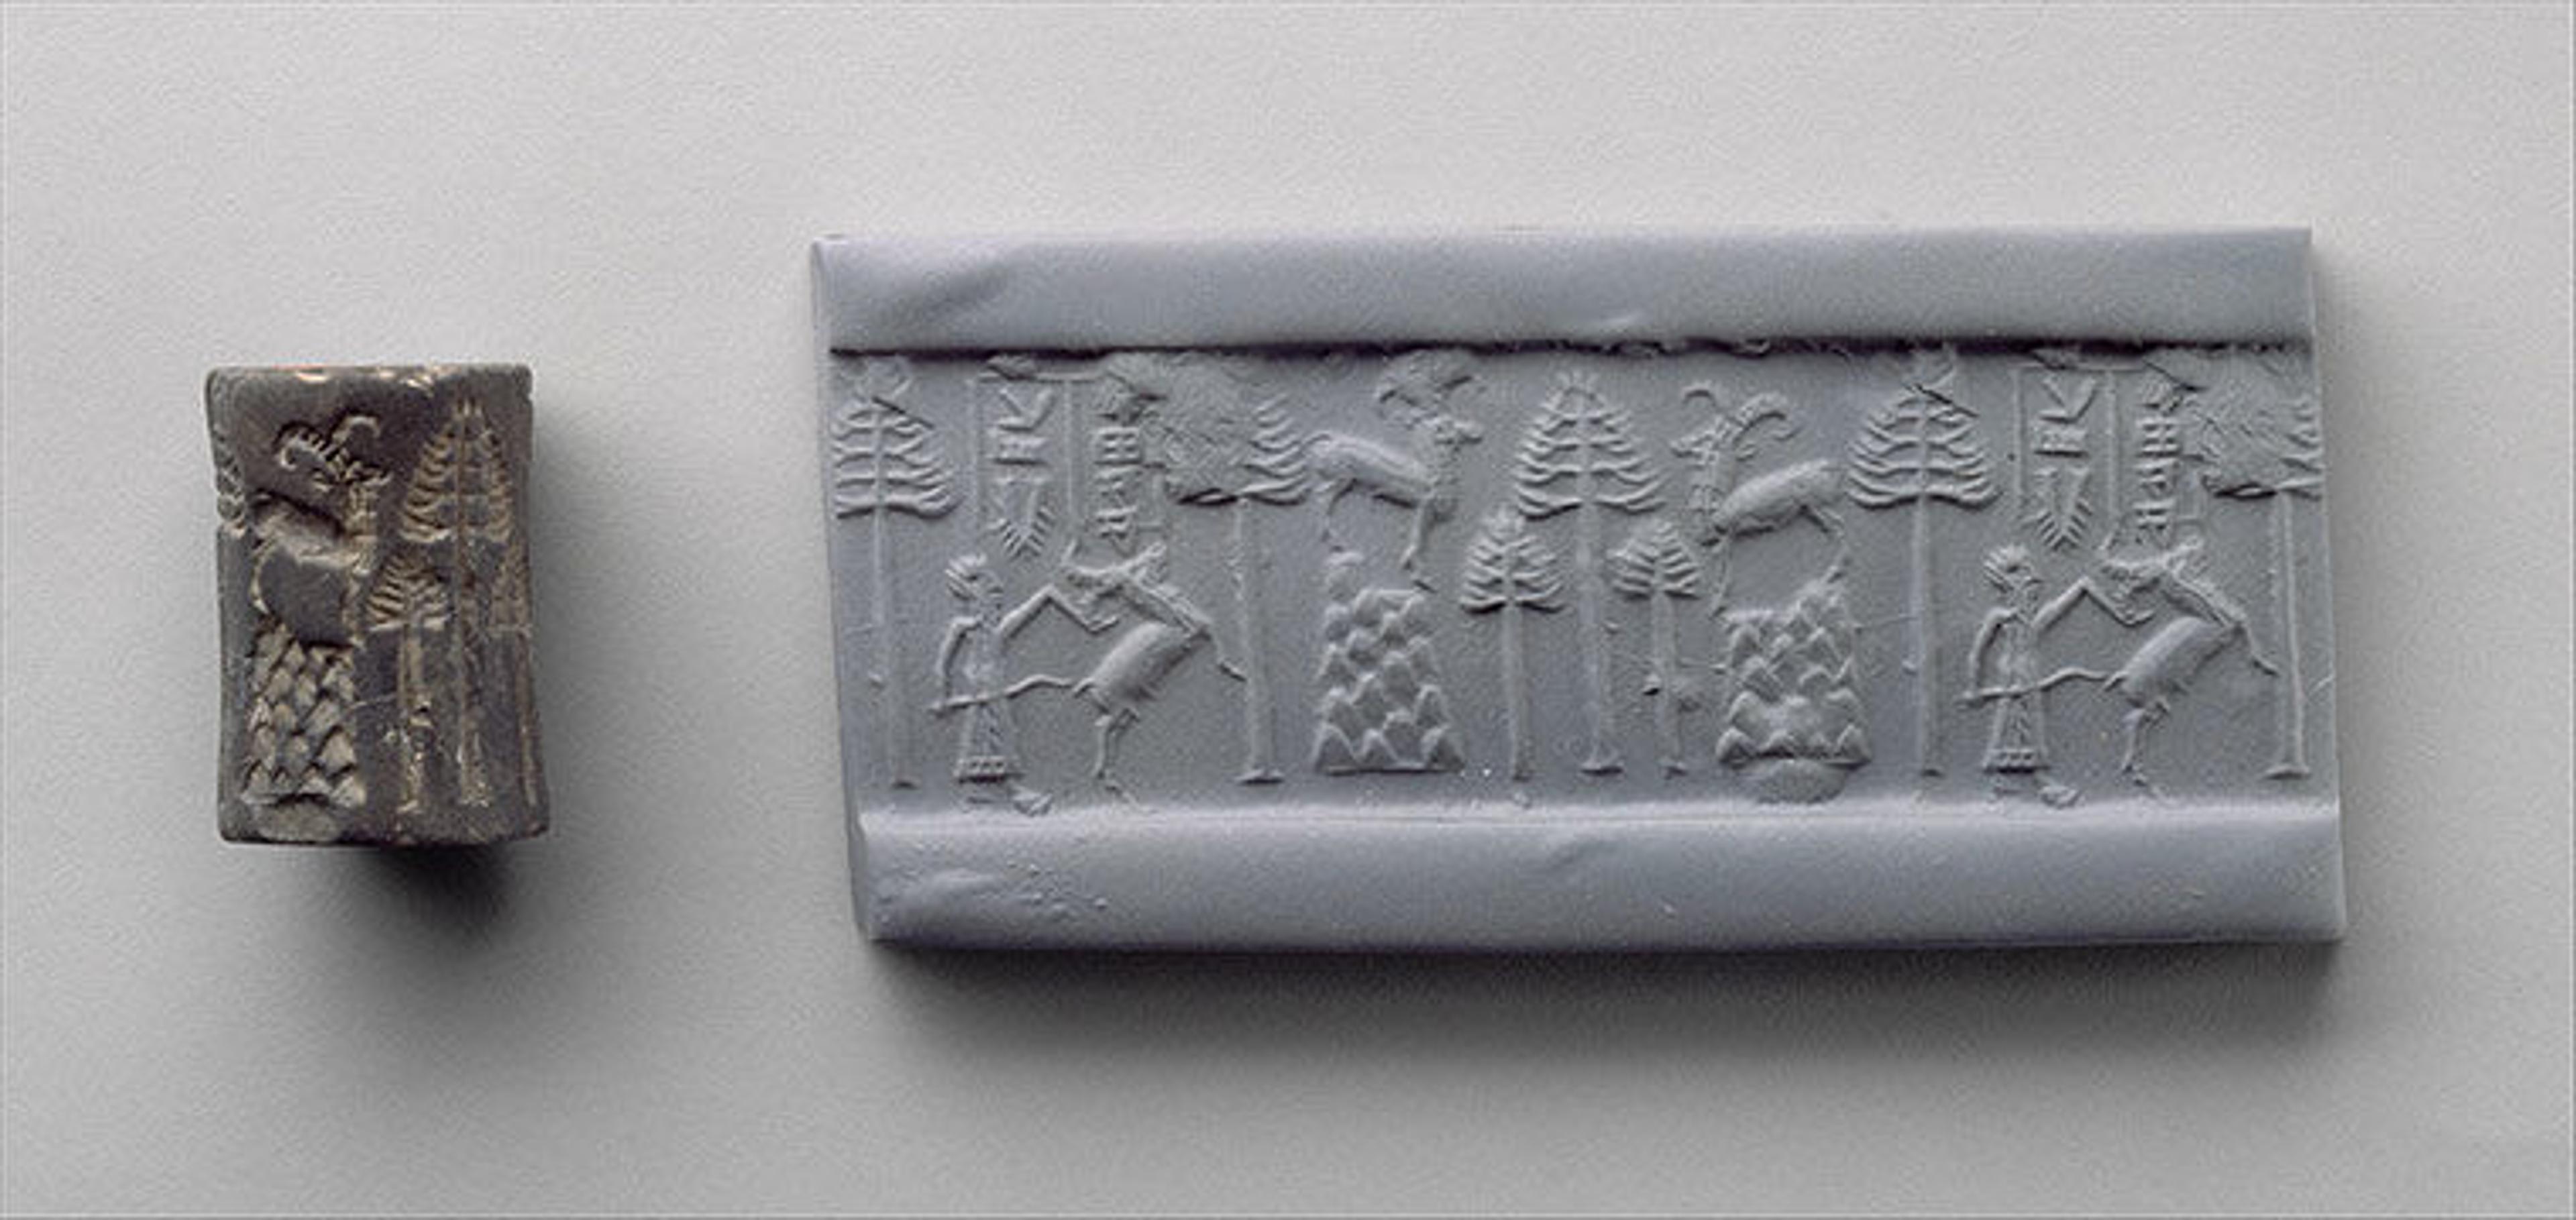 A charcoal-colored cylinder seal next to a rectangular piece of clay on which the seal was rolled. The impression left by the cylinder seal on the clay shows a hunting scene. 